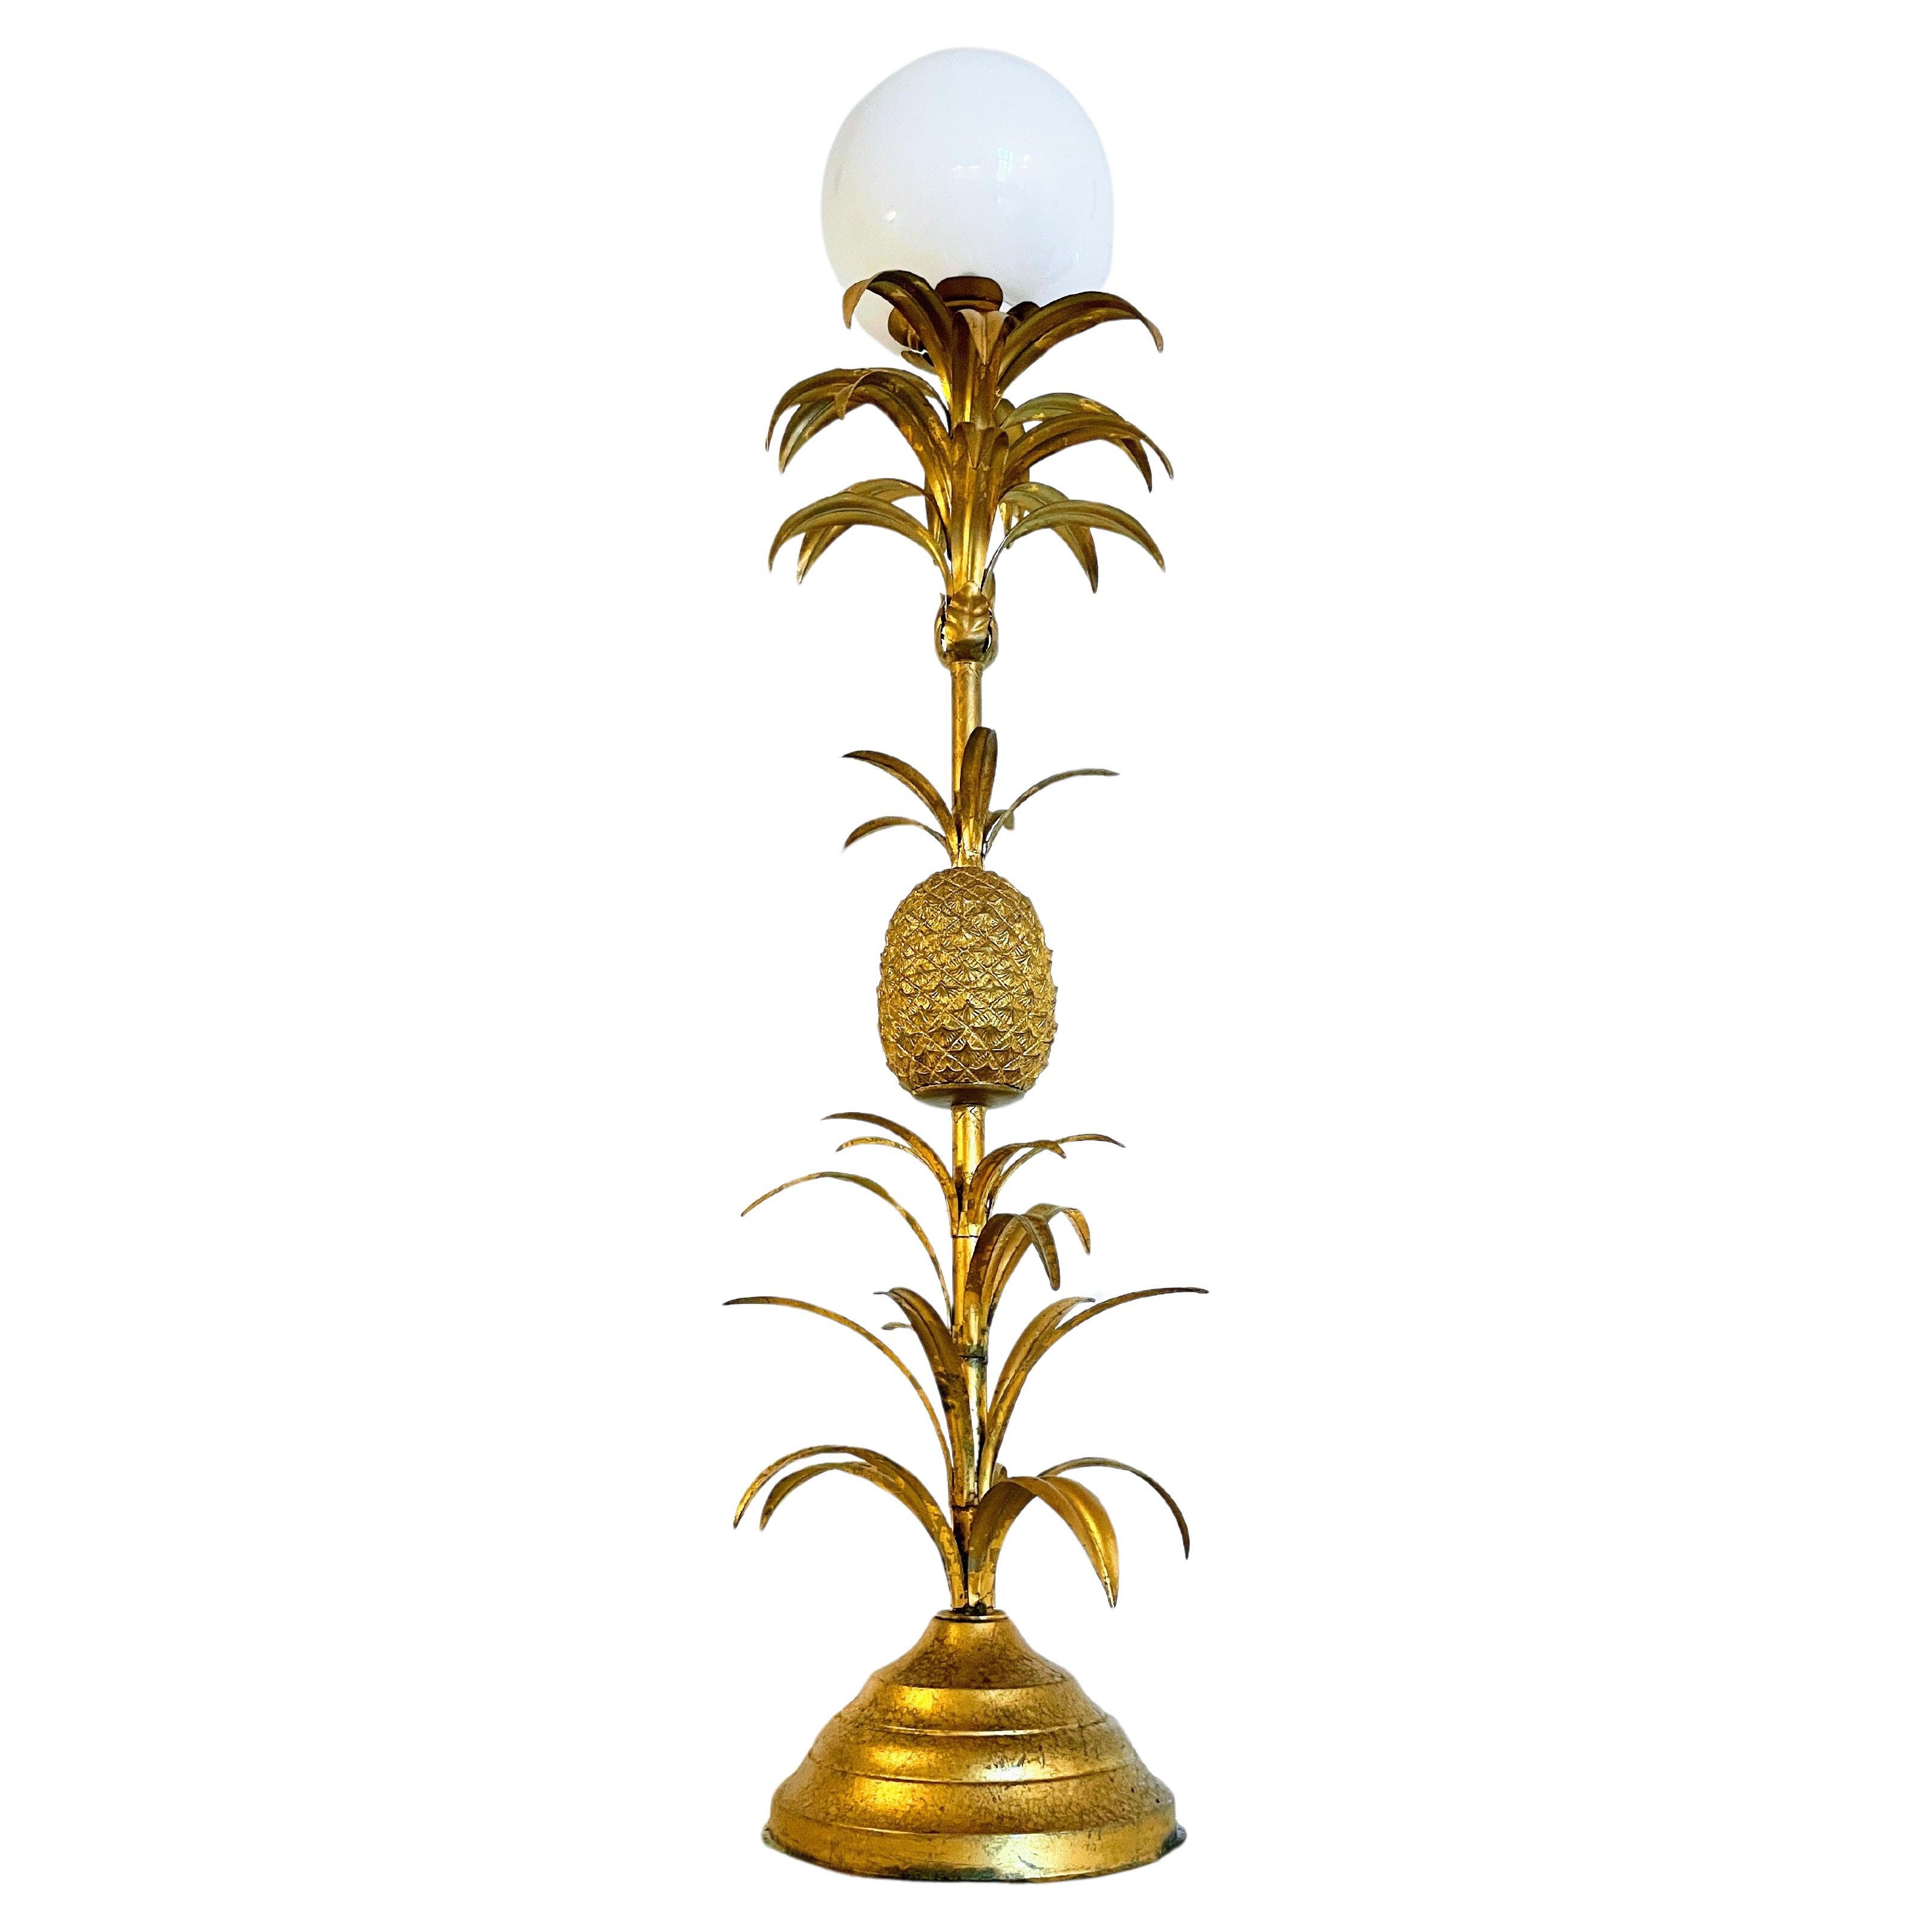 Large, luxurious floor lamp with a pineapple made of gilded metal and glass For Sale